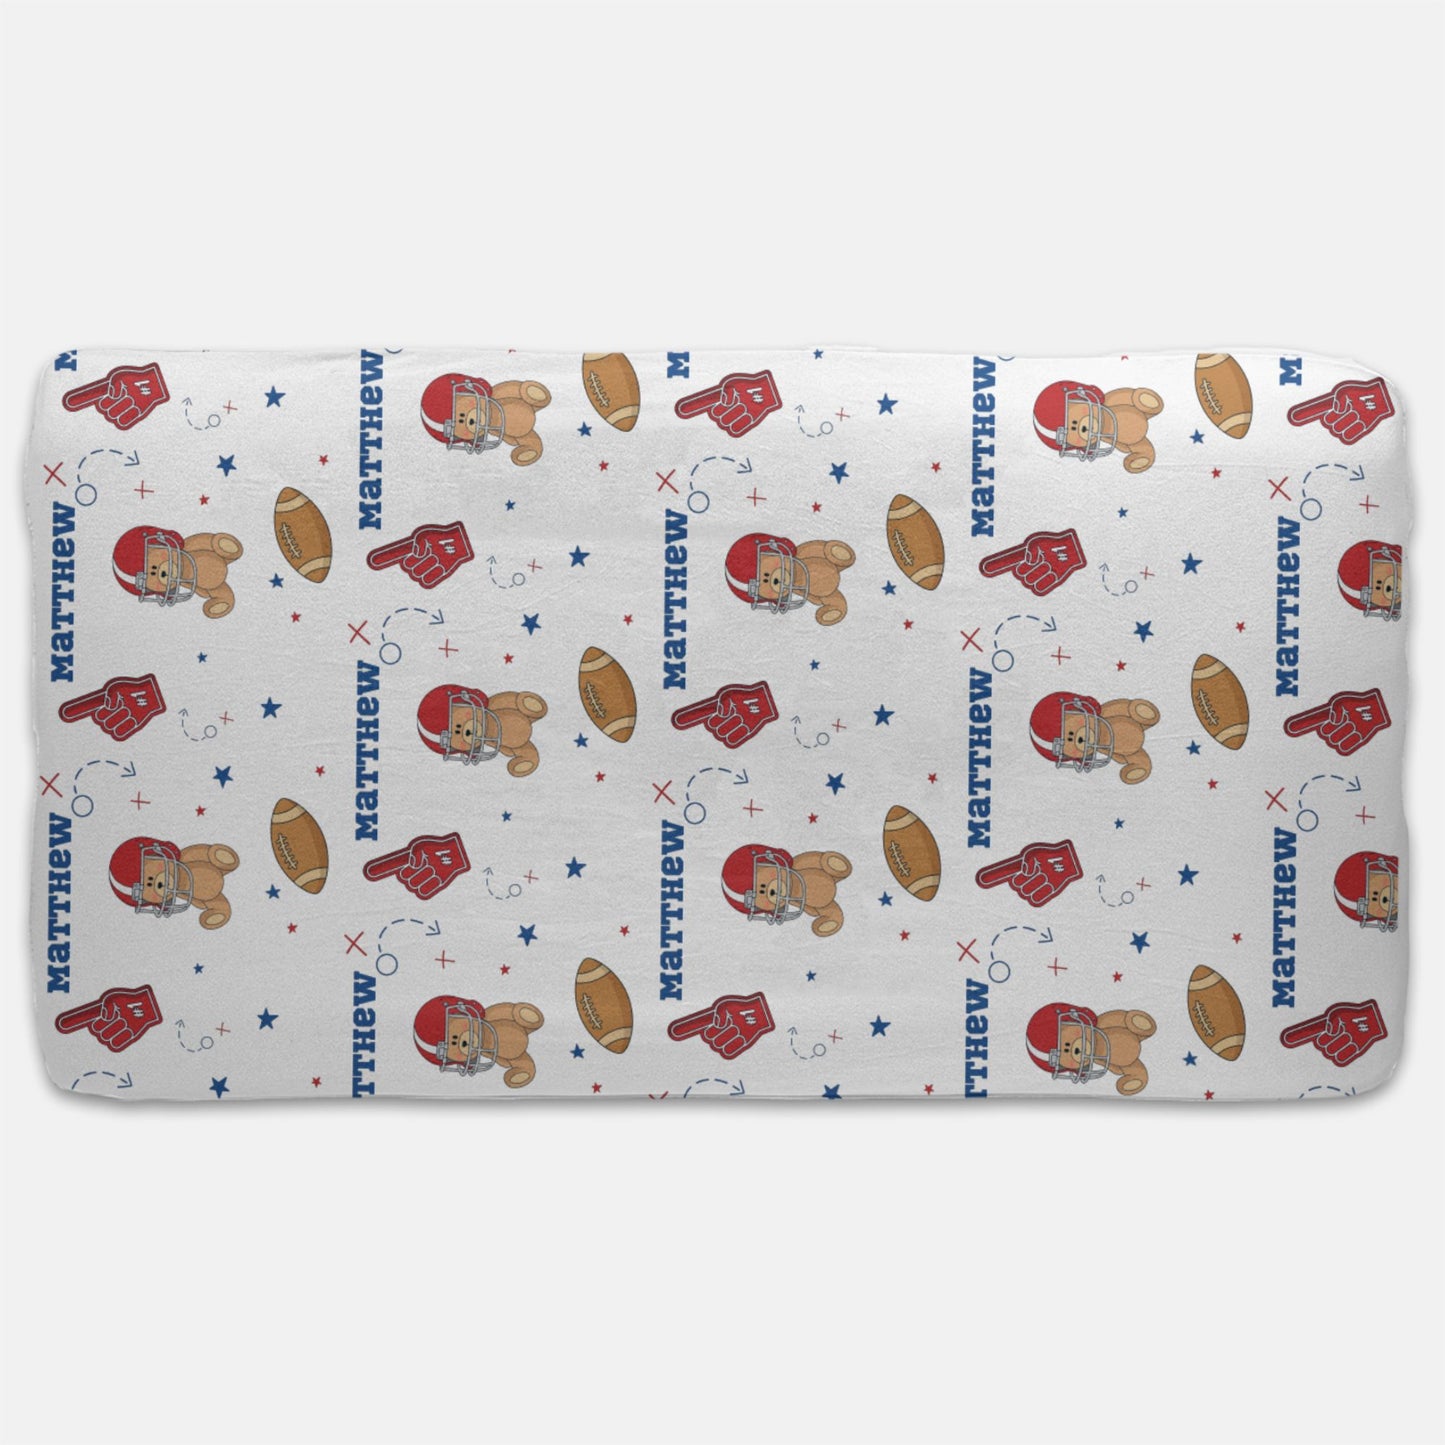 Bear NFL Game Personalized Fitted Crib Sheet